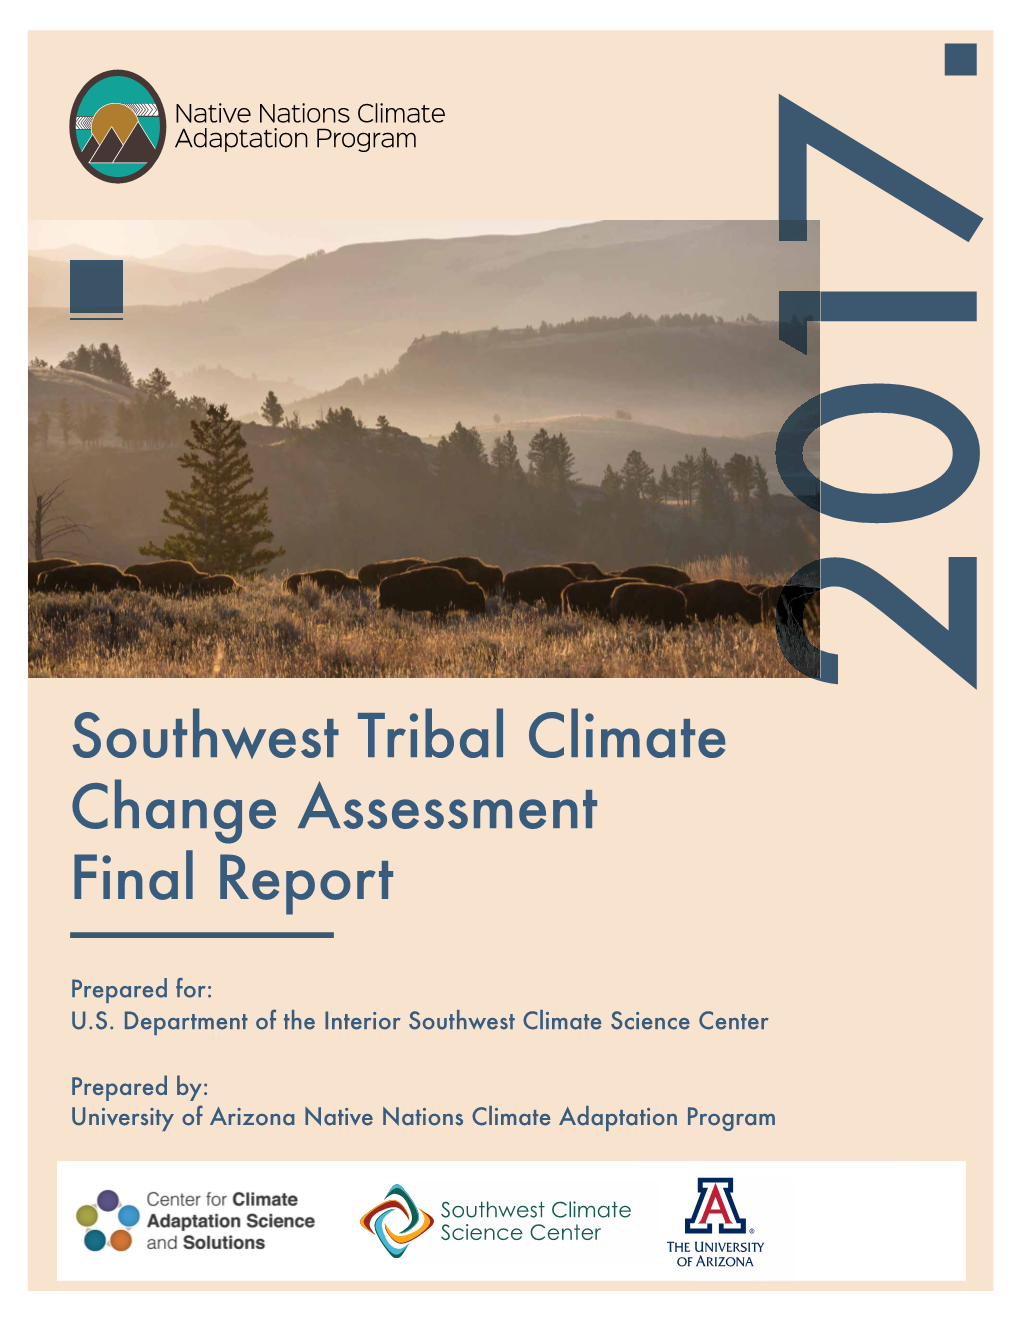 Southwest Tribal Climate Change Assessment Final Report